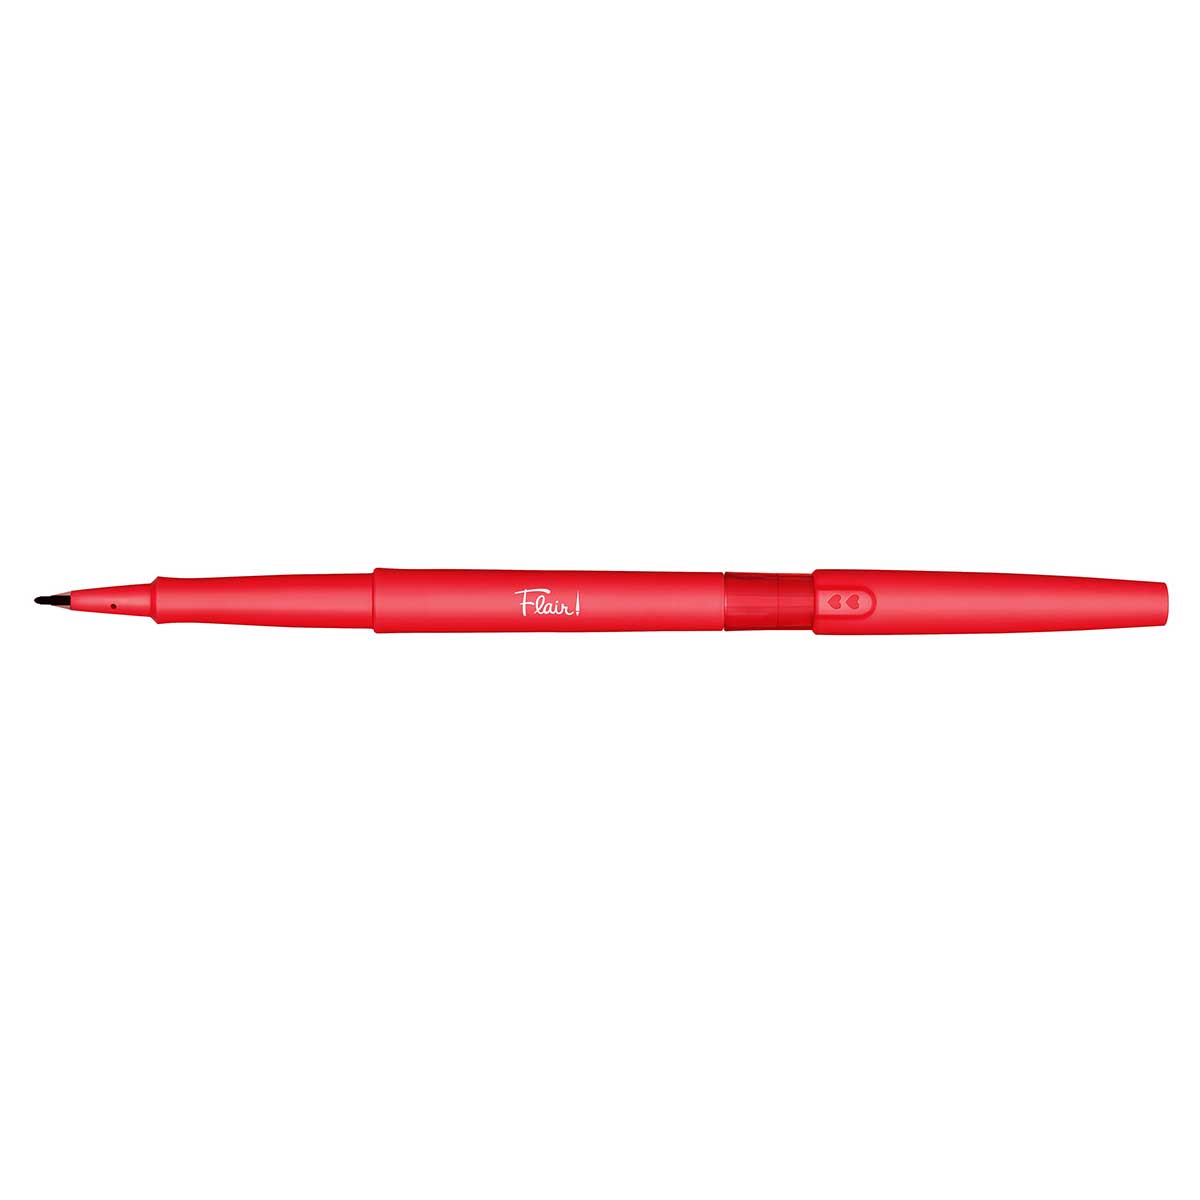 Paper Mate Flair Dual Tip Red, Brush and 0.7mm Felt Tip Pen